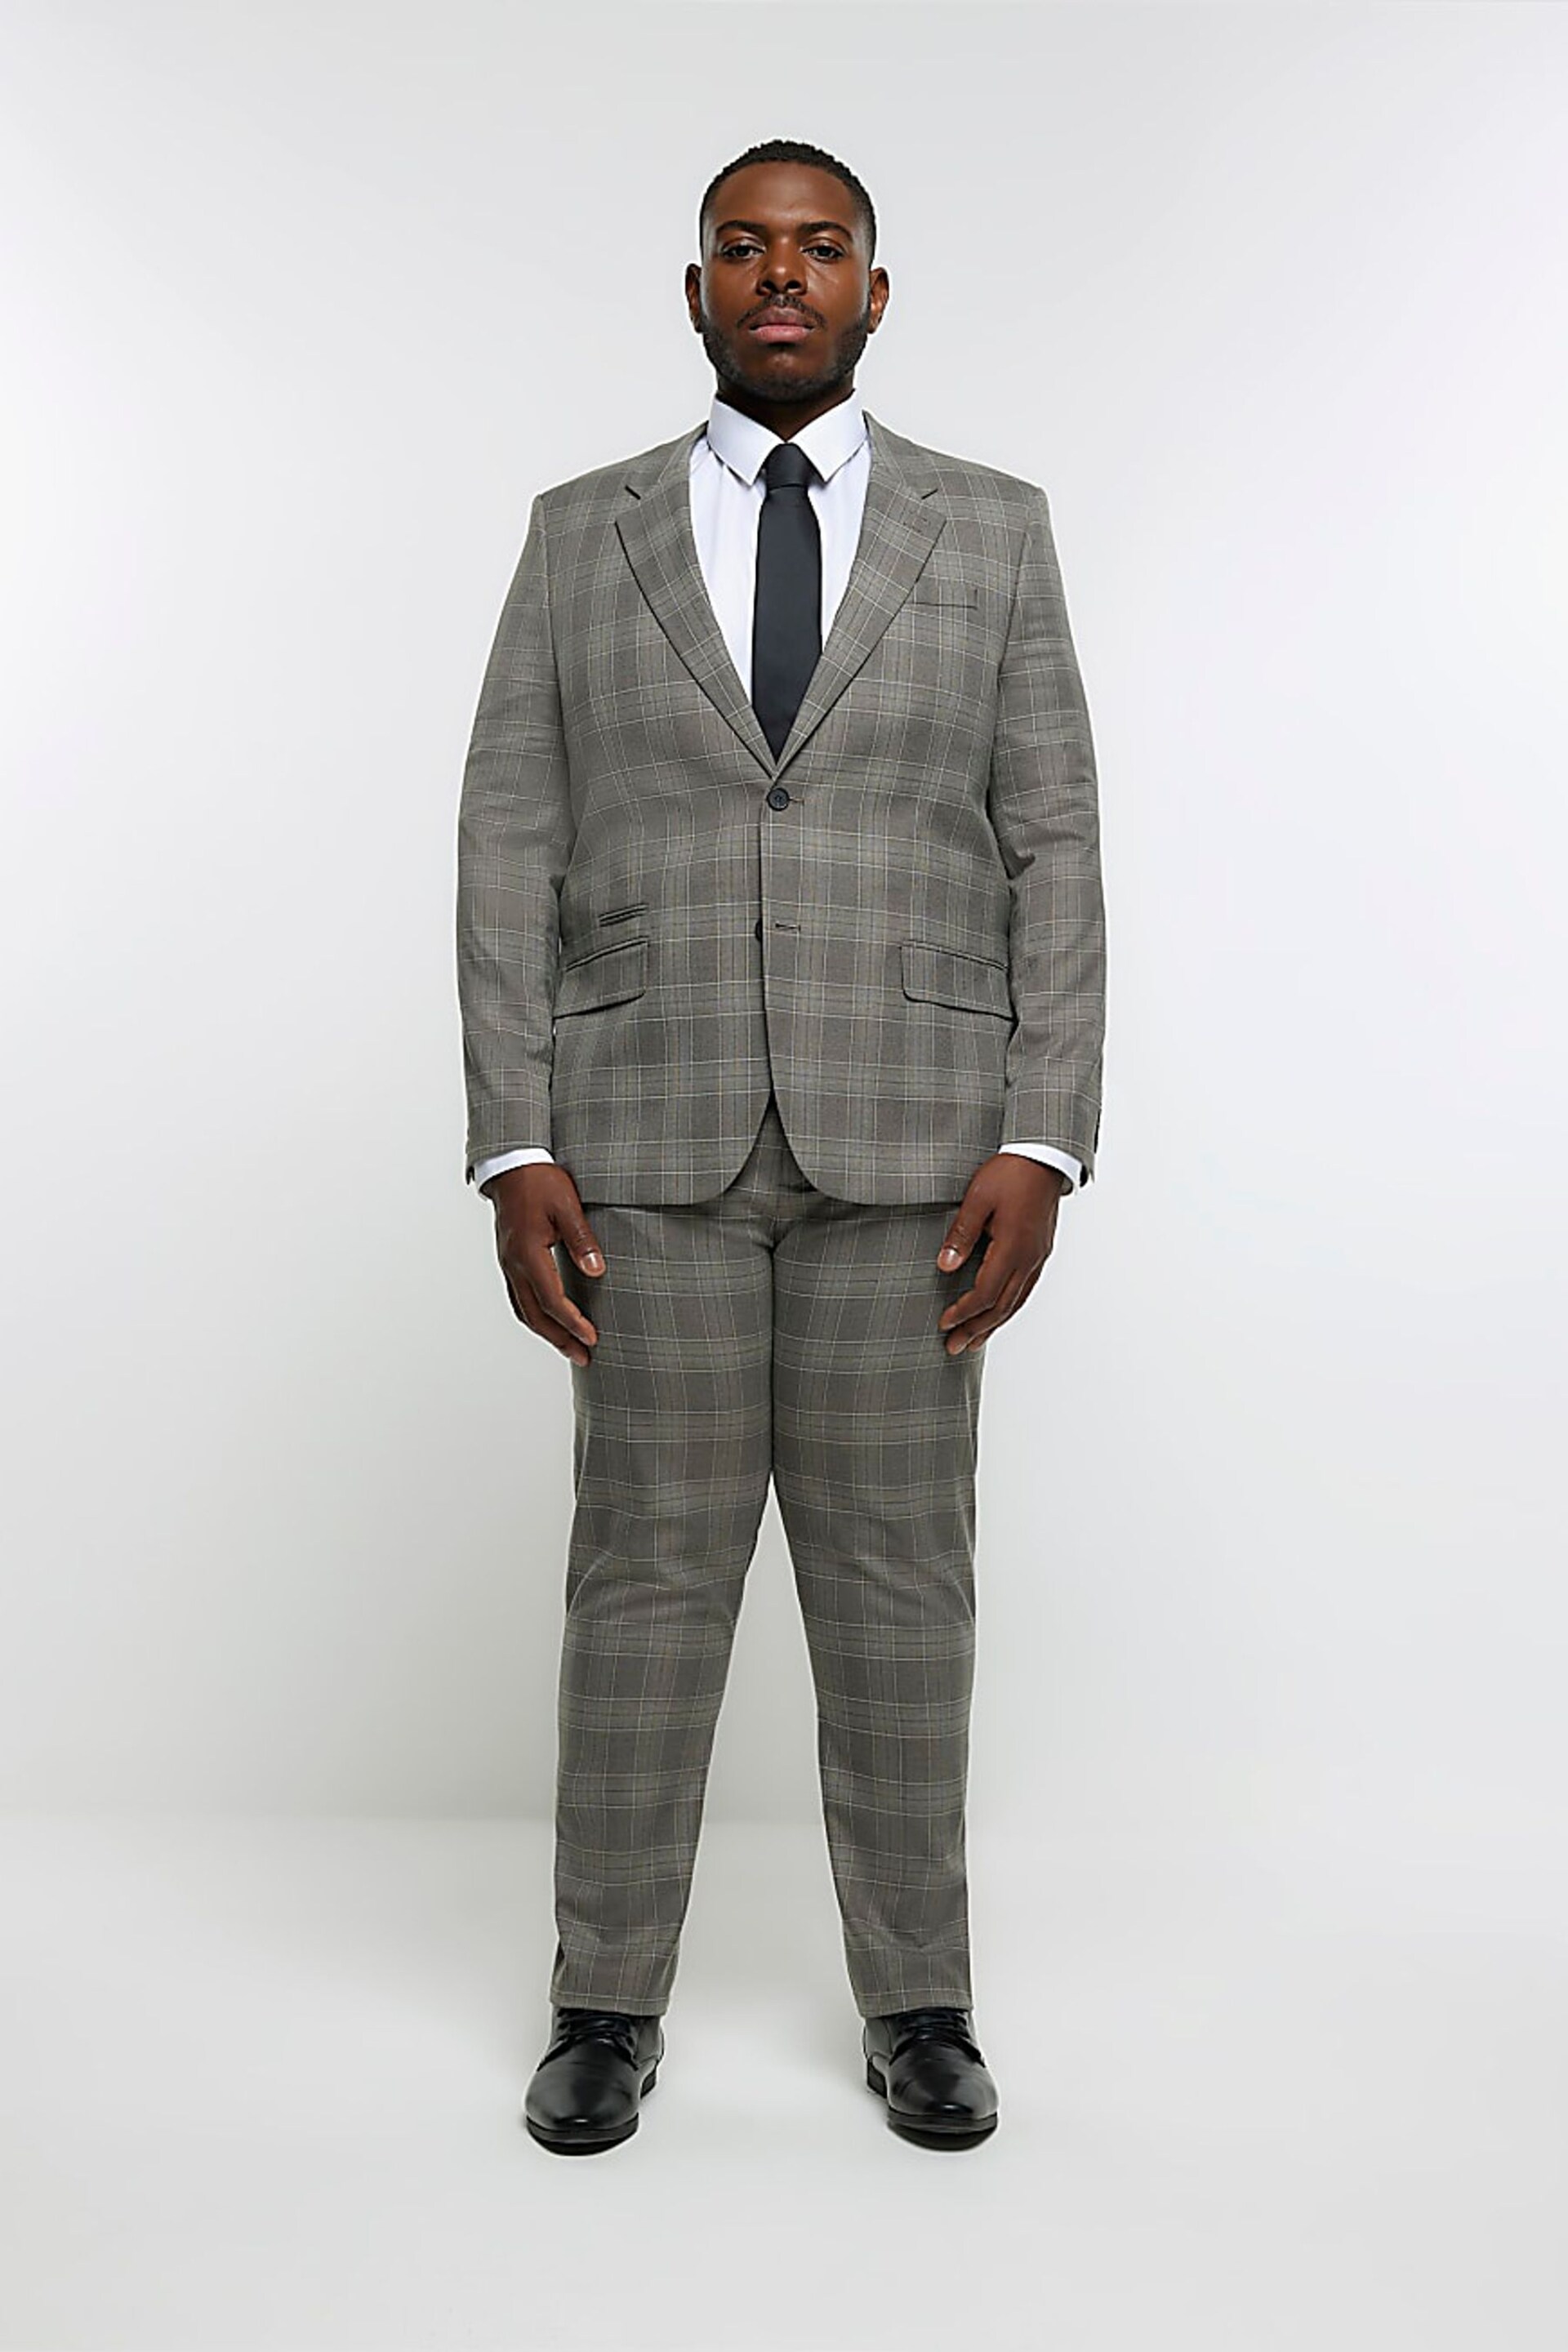 River Island Grey Big & Tall Notch Check Suit: Jacket - Image 3 of 6